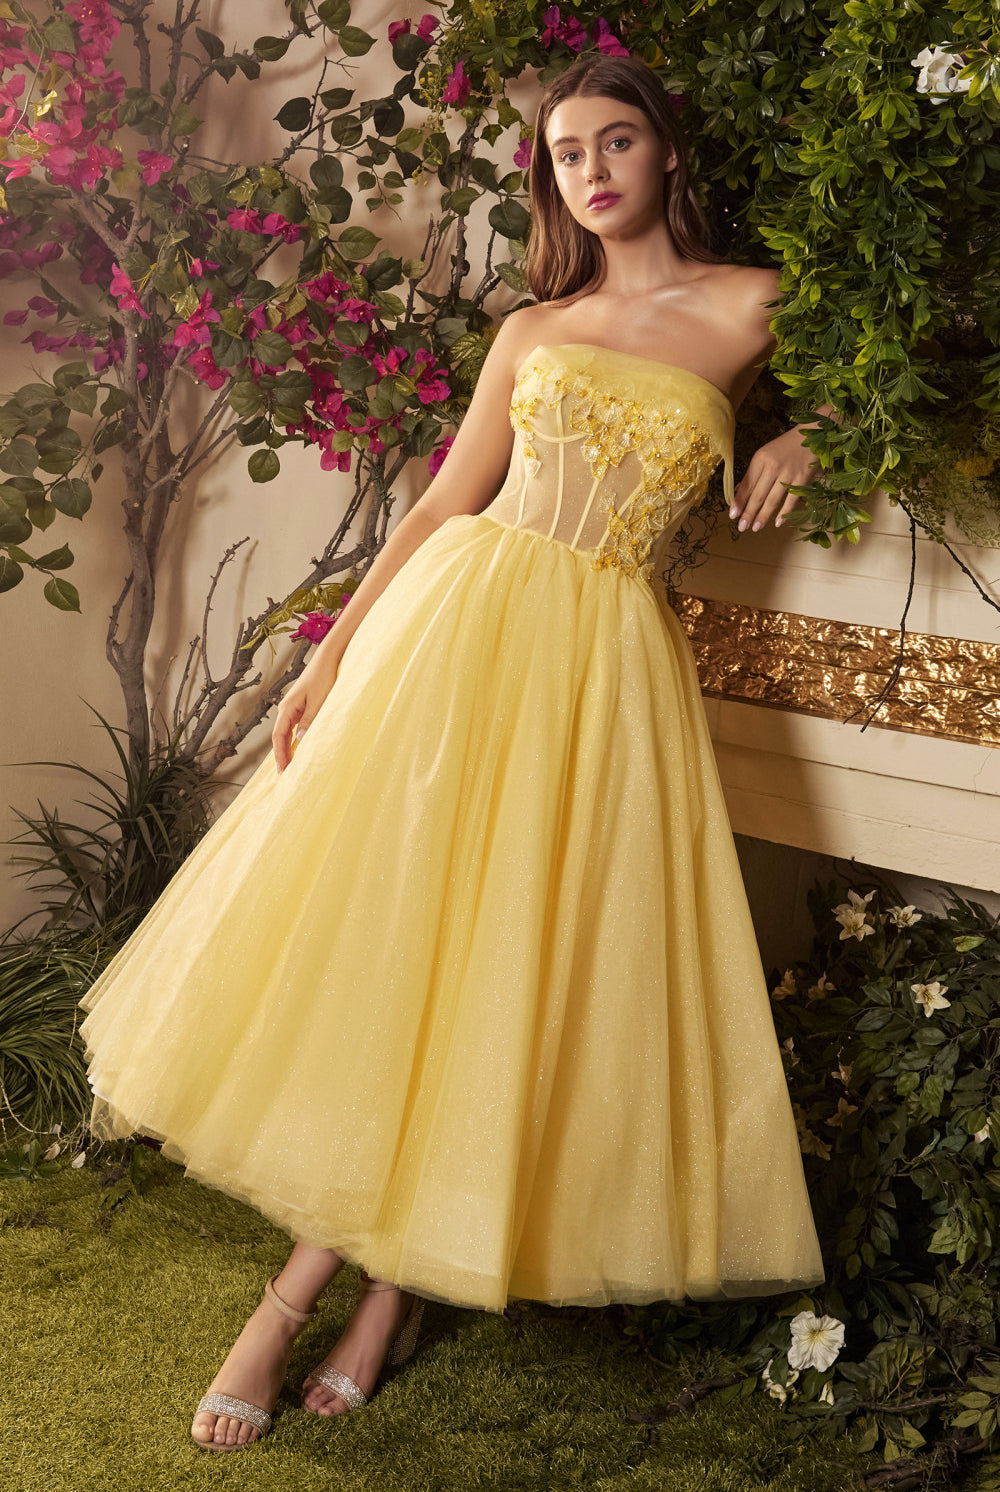 Sunny Yellow Floral Gown with Corseted Princess Style and Embroidery-smcdress